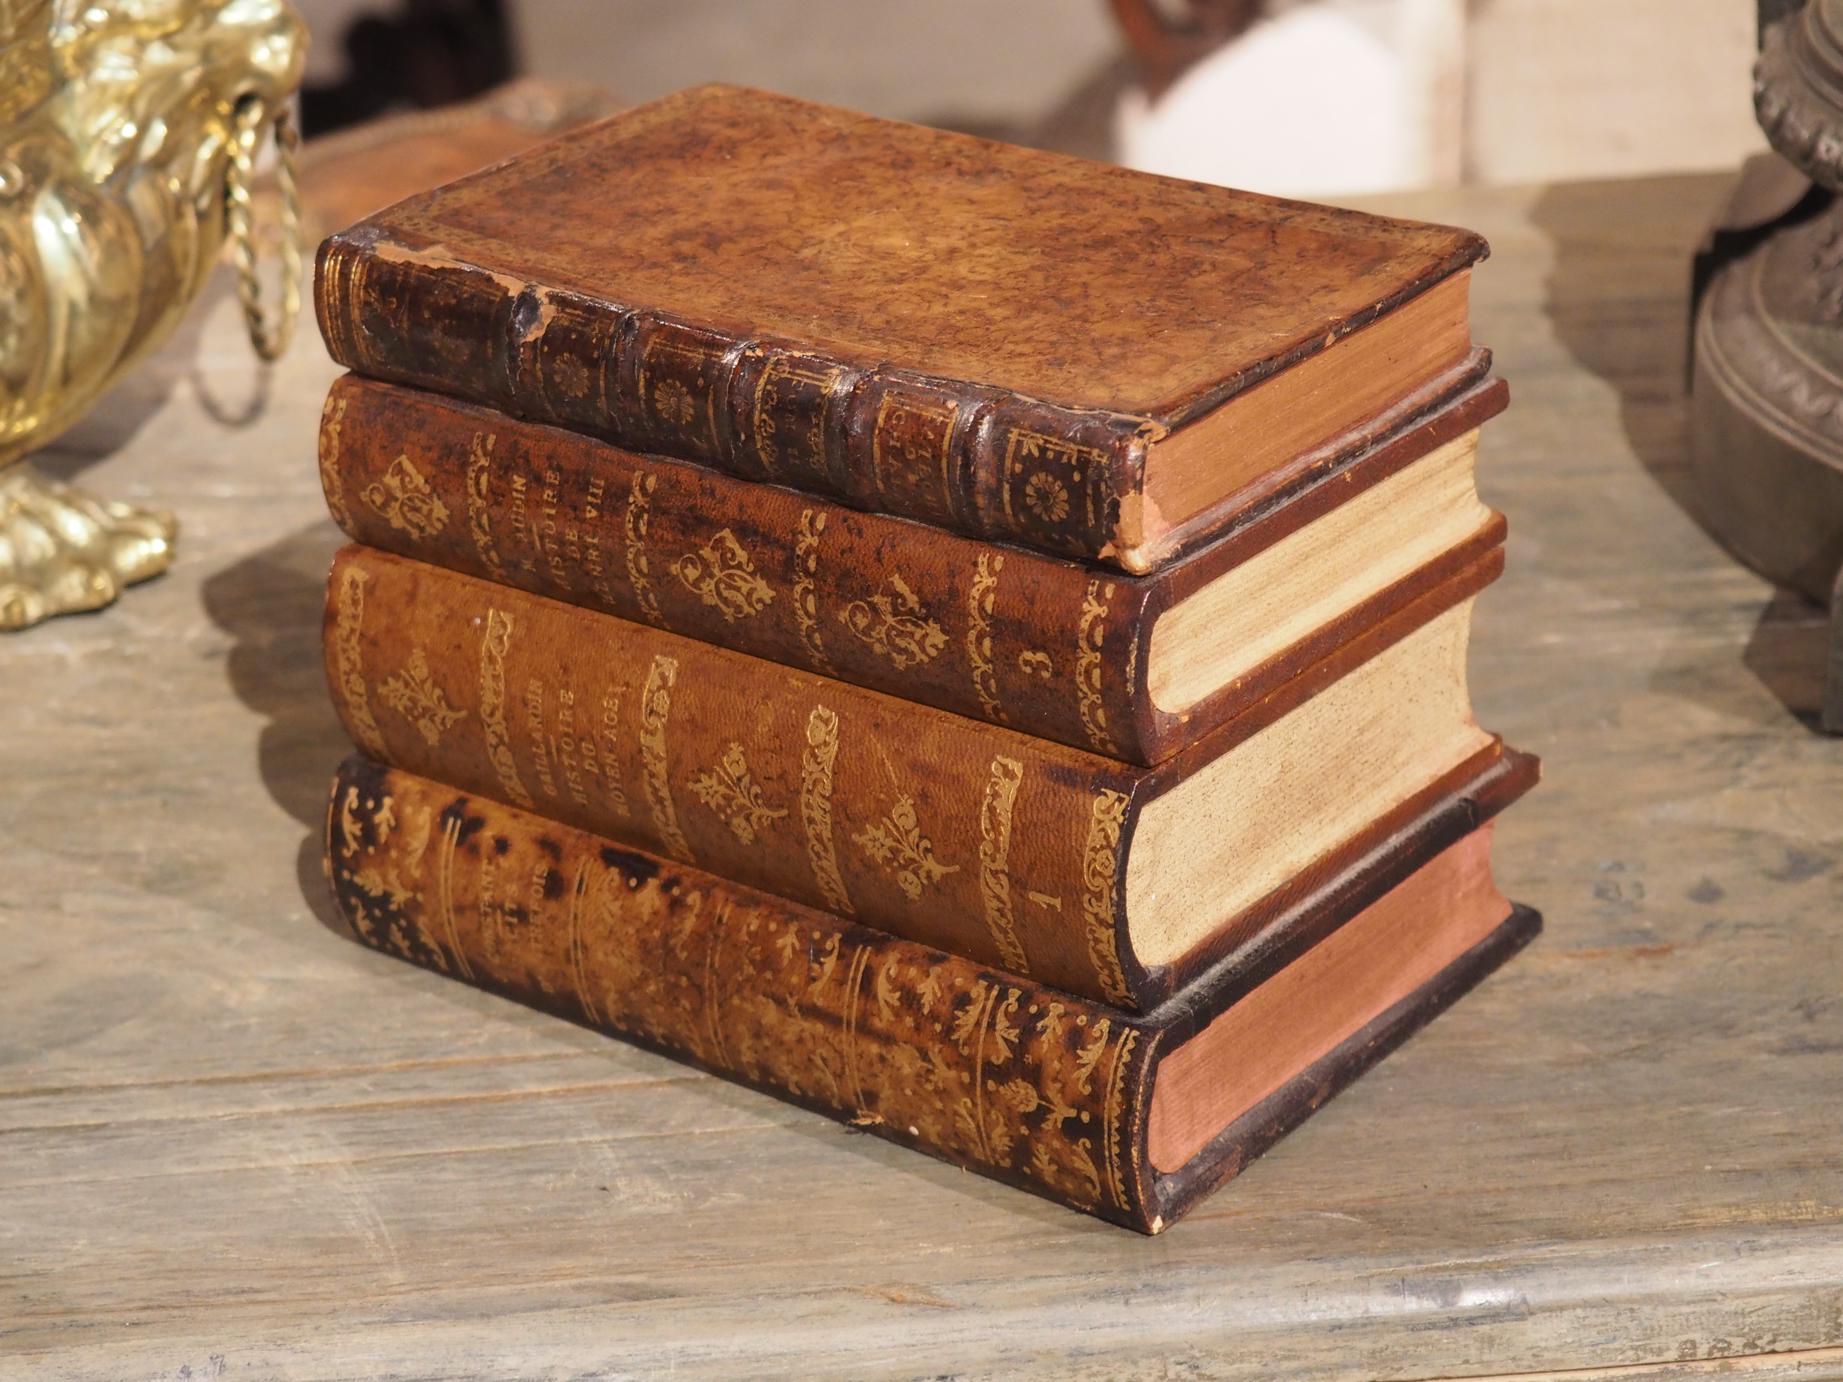 Old Books With Vintage Bindings And Beautiful Gilded Leather Book